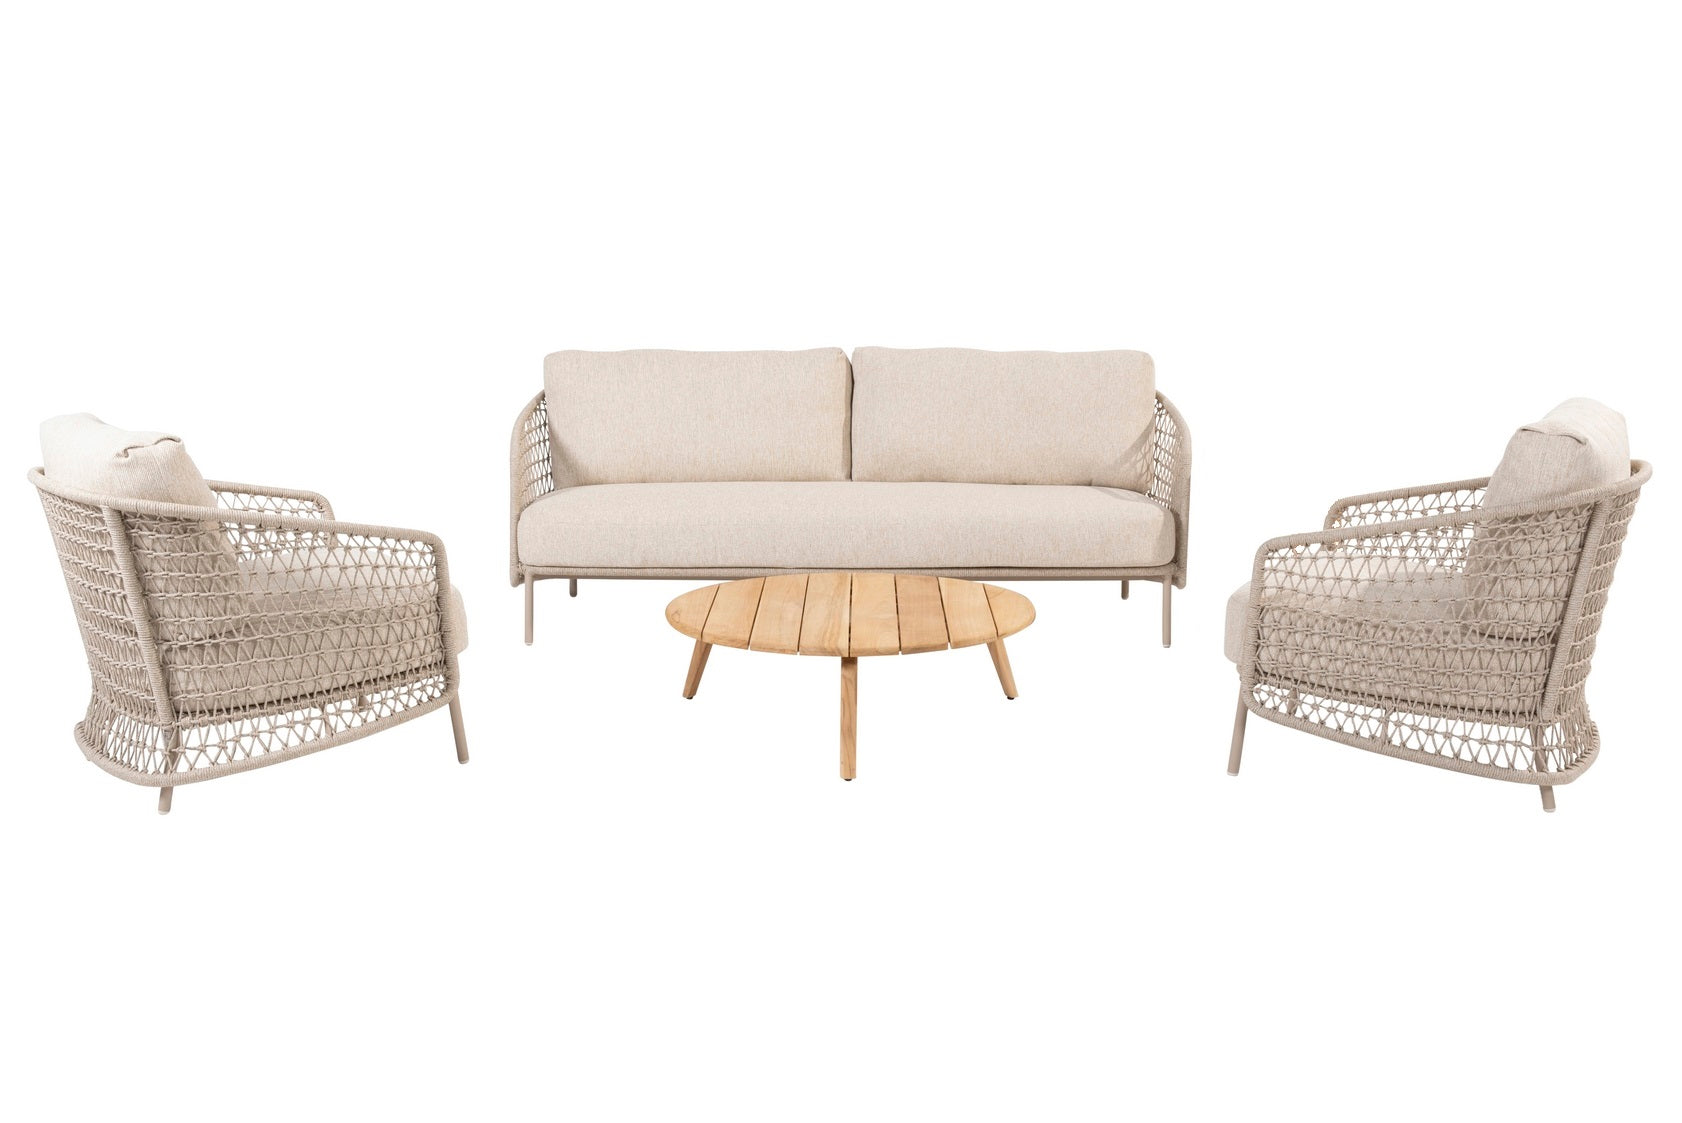 Puccini Outdoor Lounge Set by 4 Seasons Outdoor